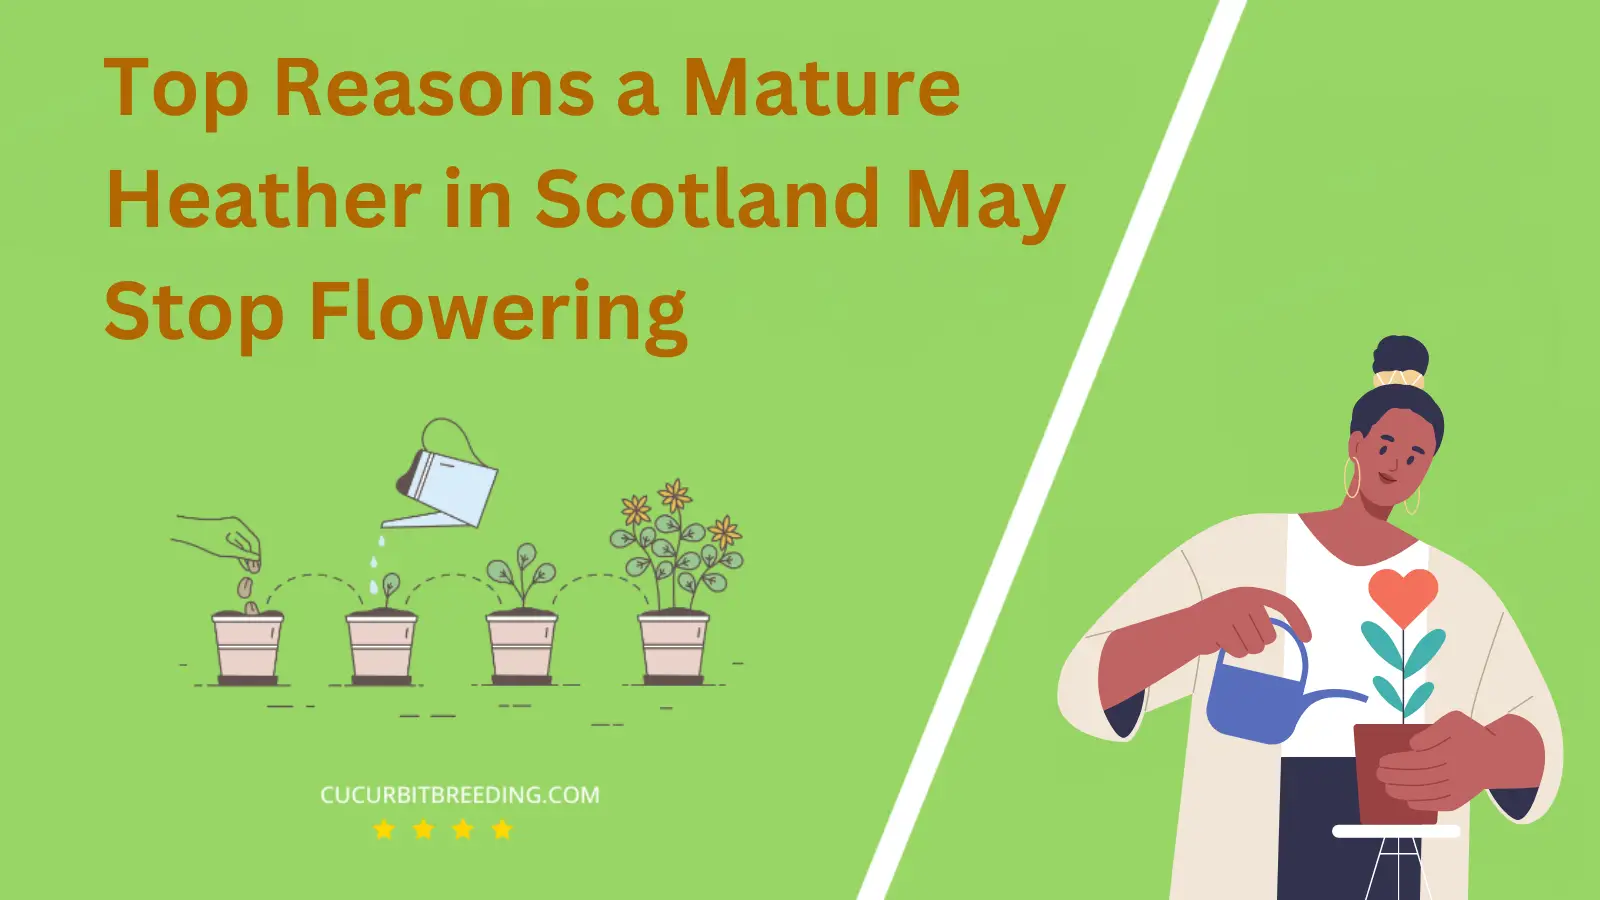 Top Reasons a Mature Heather in Scotland May Stop Flowering